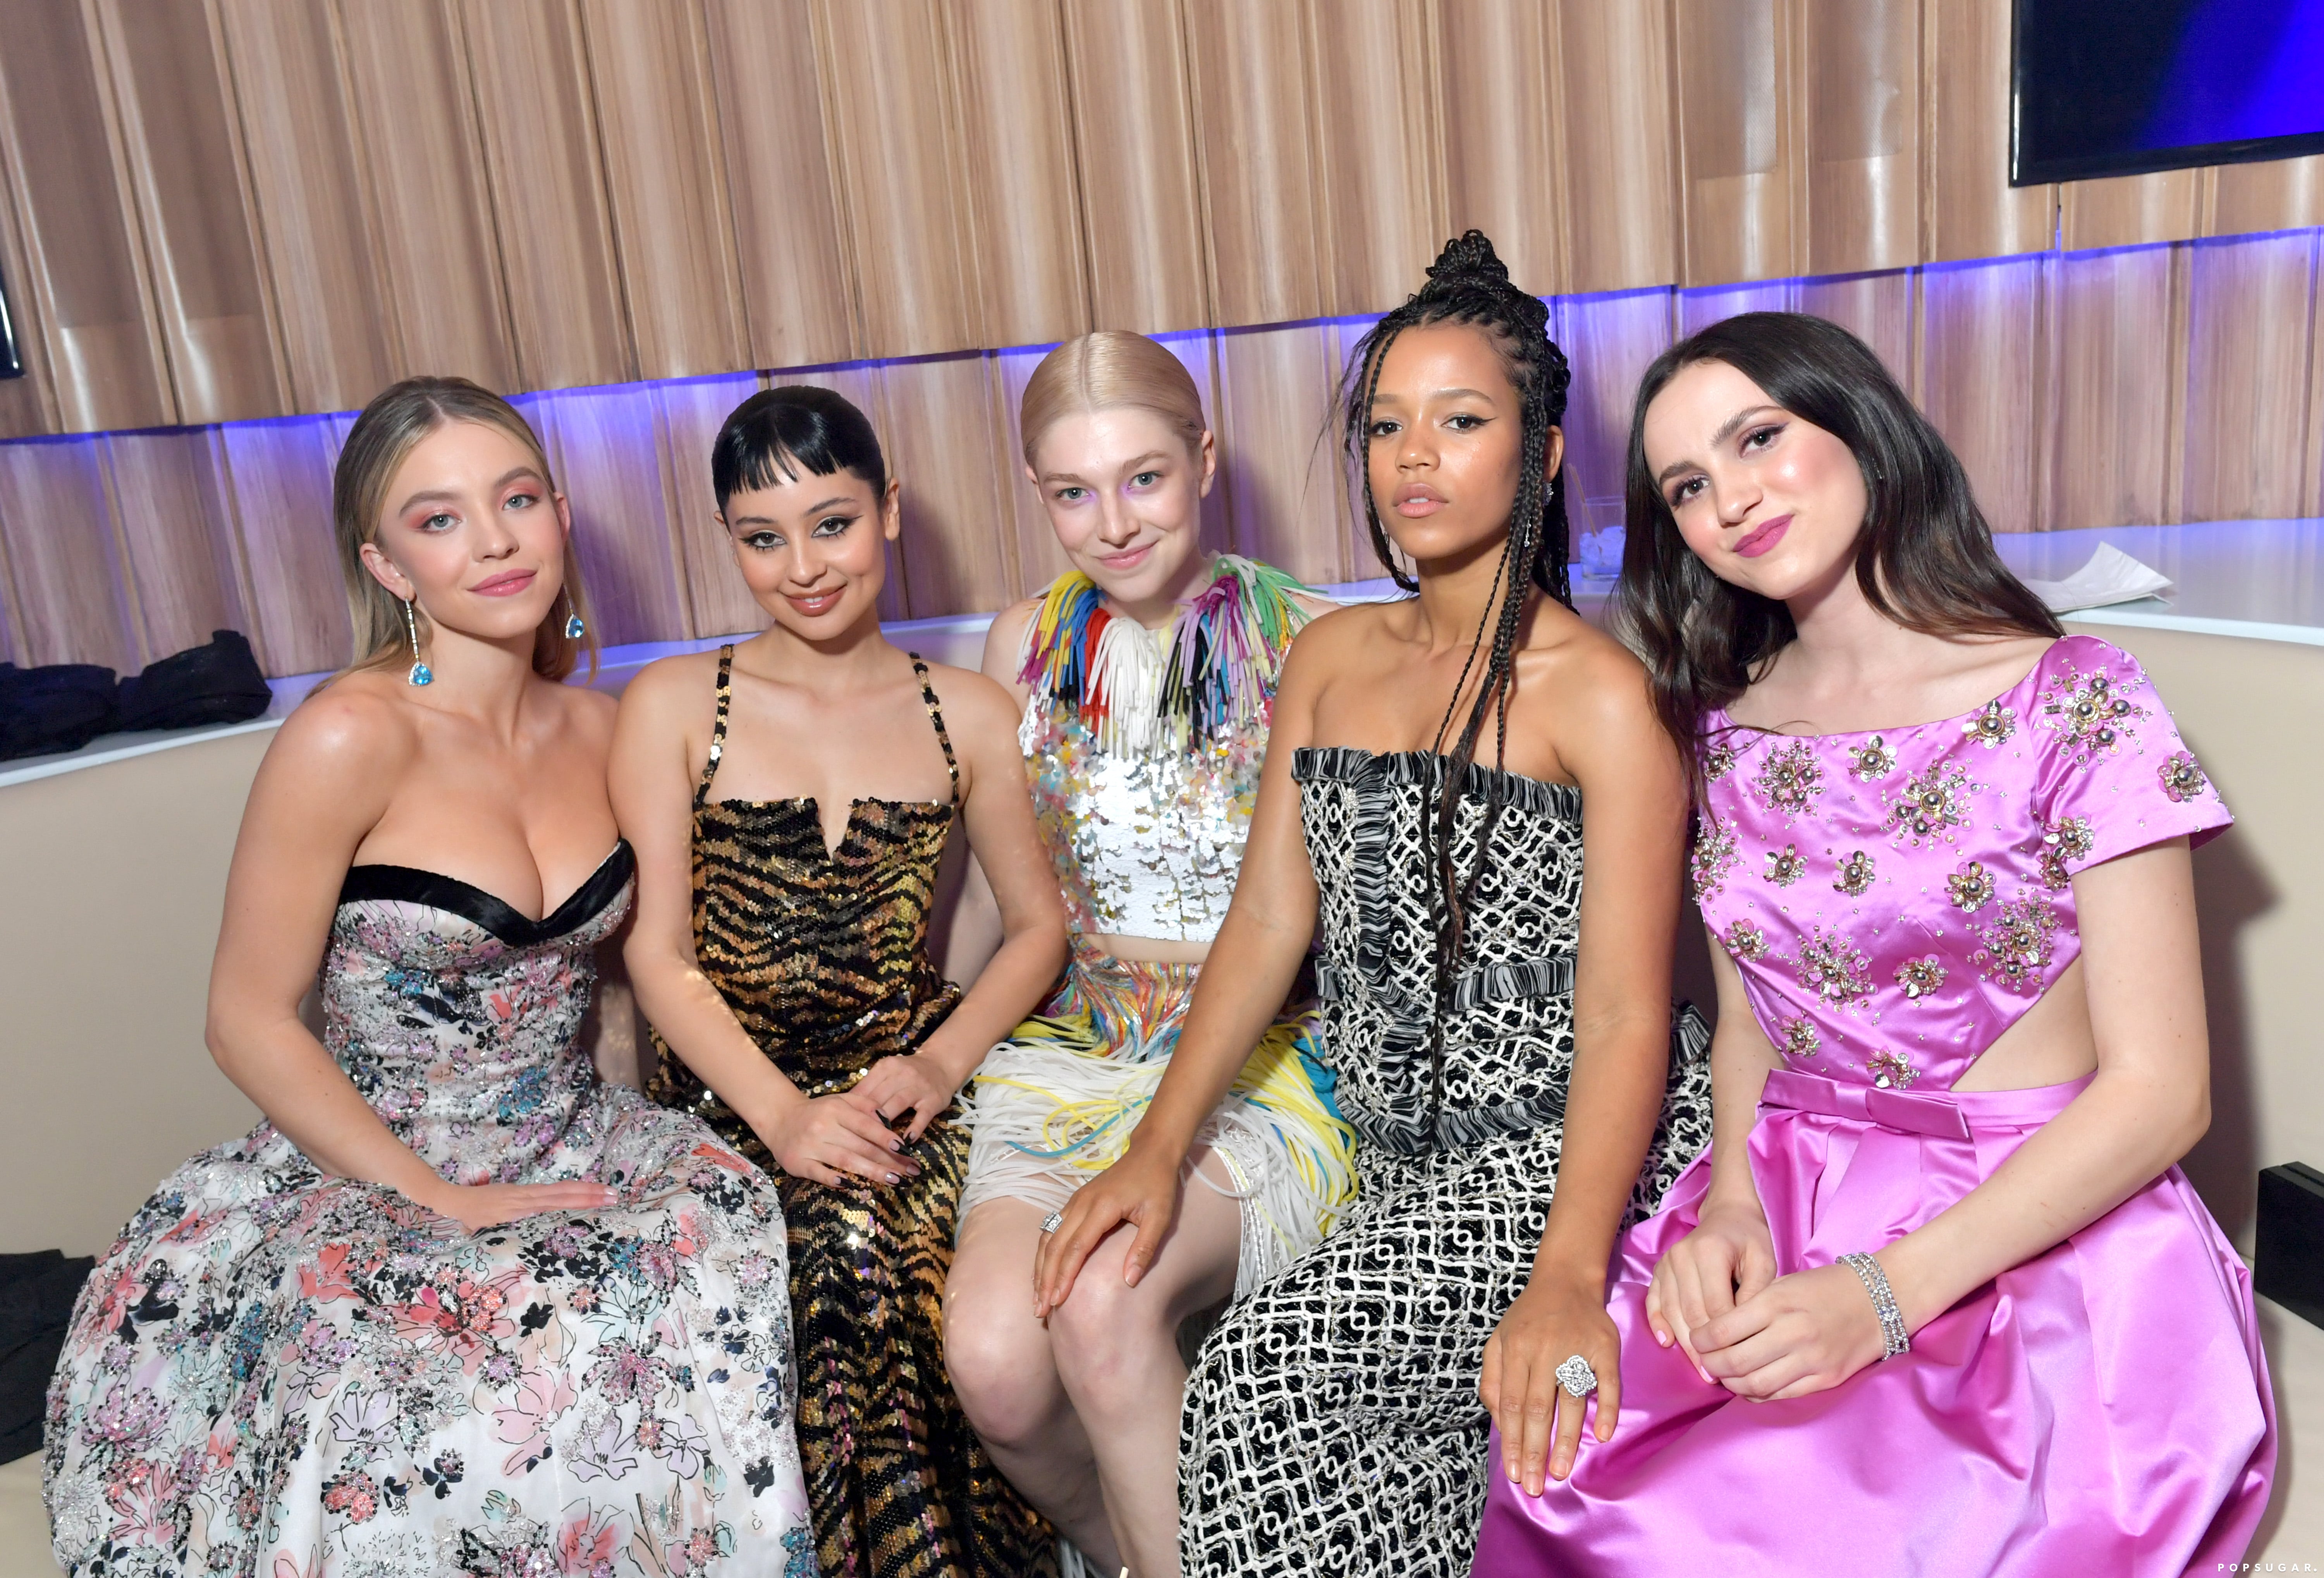 The Euphoria Cast at the 2020 Vanity Fair Oscars Afterparty